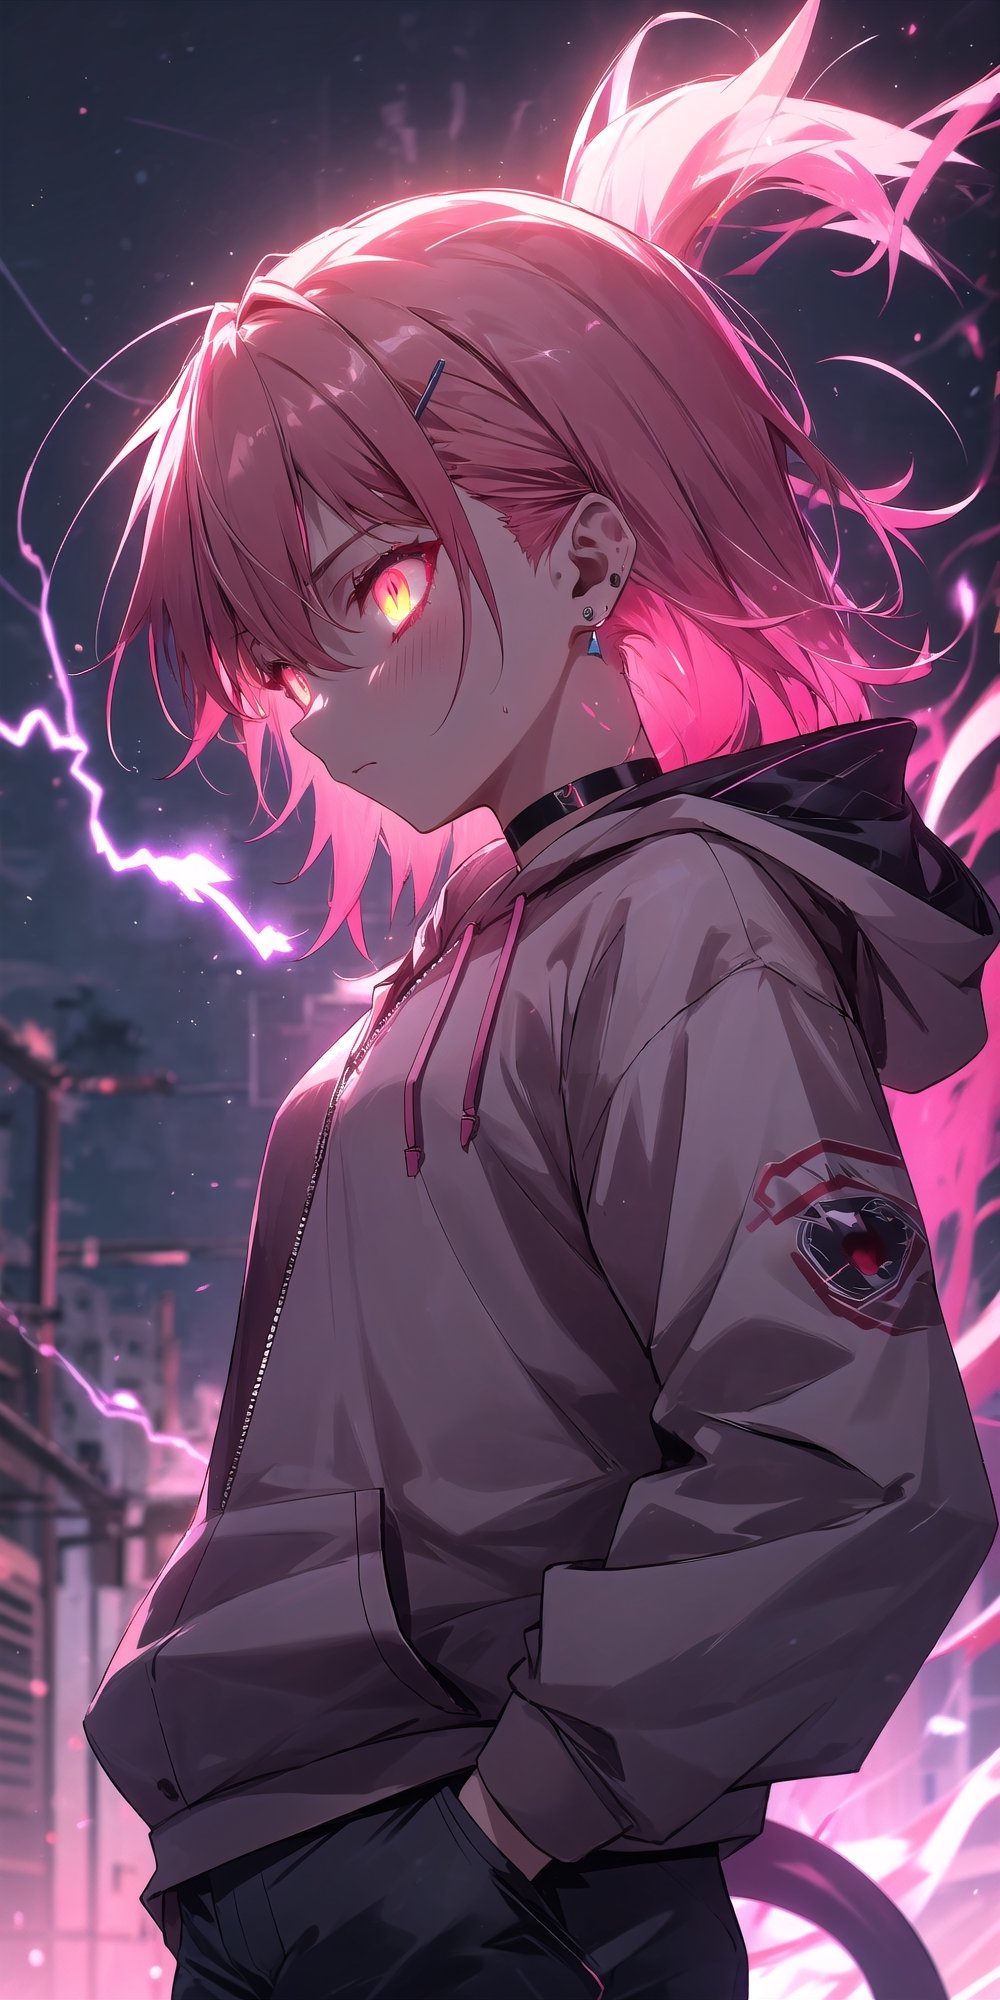 masterpiece, best quality, absurdres, perfect anatomy, 1girl, solo, earrings, sharp eyes, choker, neon shirt, open jacket, turtleneck sweater, night, dim lighting, alley, cats ears,1girl hairclip,Neon Light, blushing, glowing eyes, neon eyes, neon clothes, glow_in_the_dark, hoodie, hooded, short_pants, black clothes, hand_in_pocket, tsunderia, hooding, arrgant, has a Lightning power, lighting from hand, Lightning from her eyes,lighting eyes, profile, dark theme, sad theme, multicolored eyes, flaming tail eyes, flaming eyes, flaming_tail,r1ge